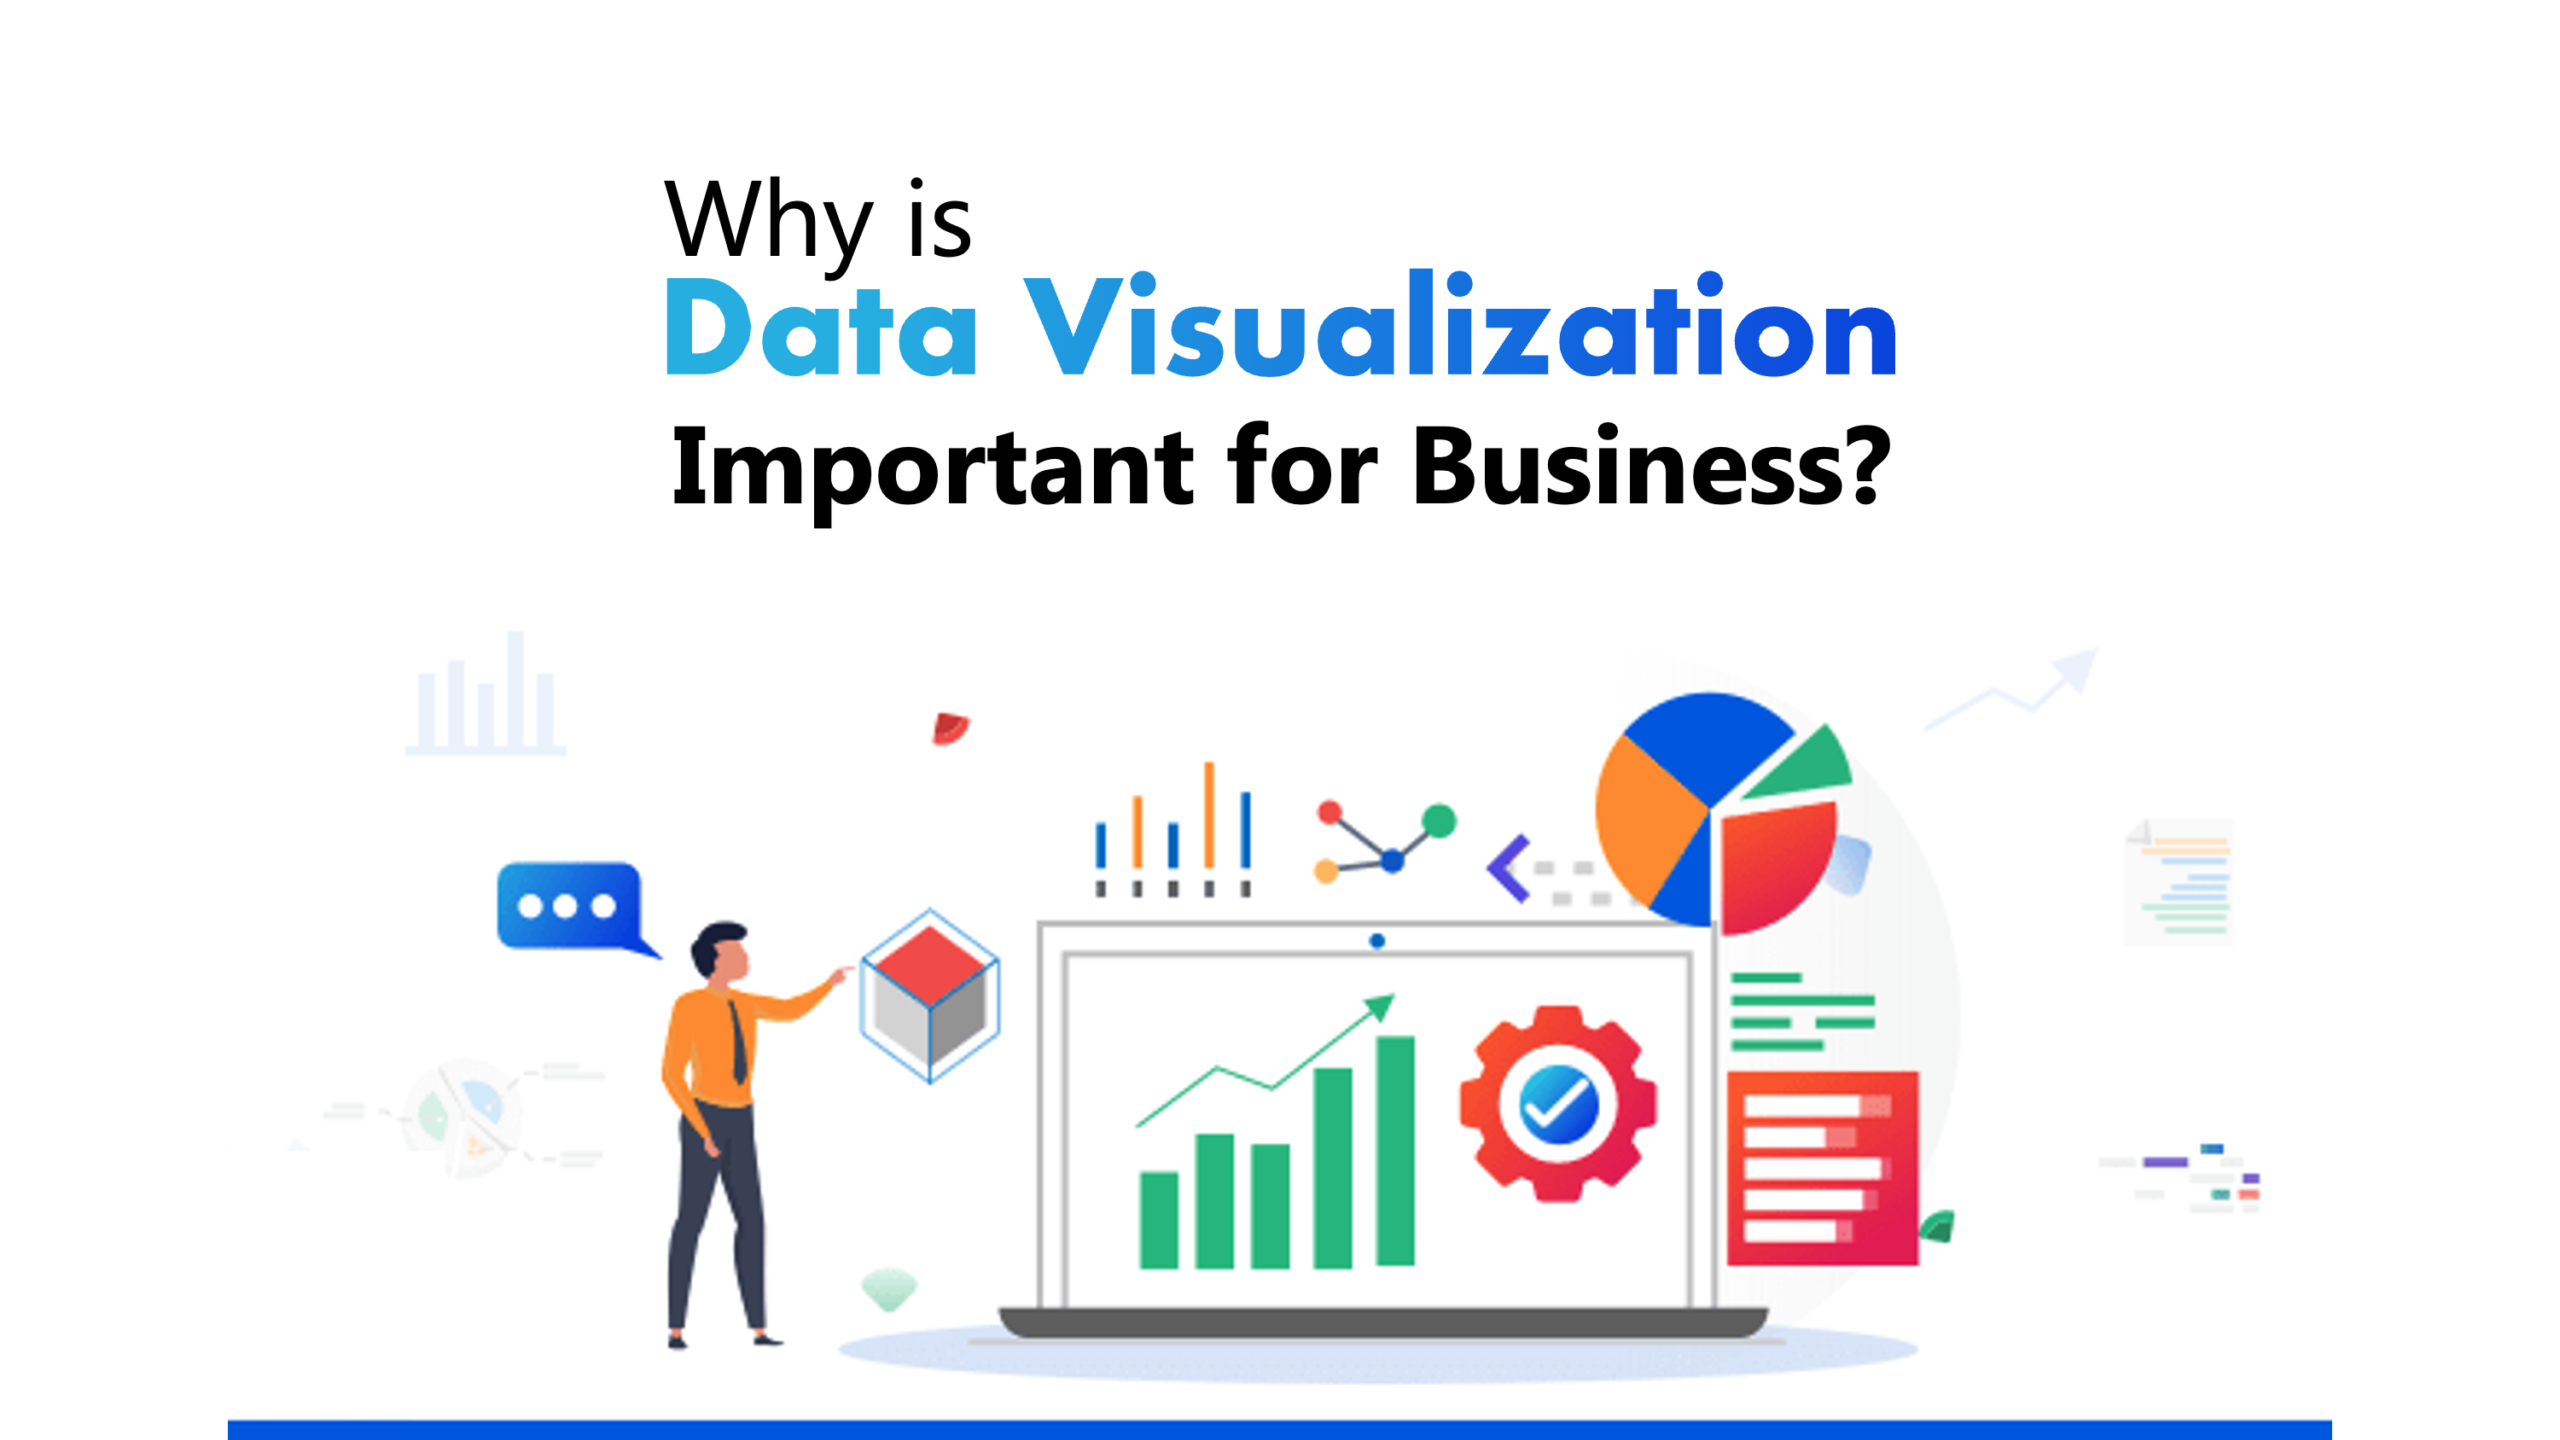 Why is data visualization important for business?